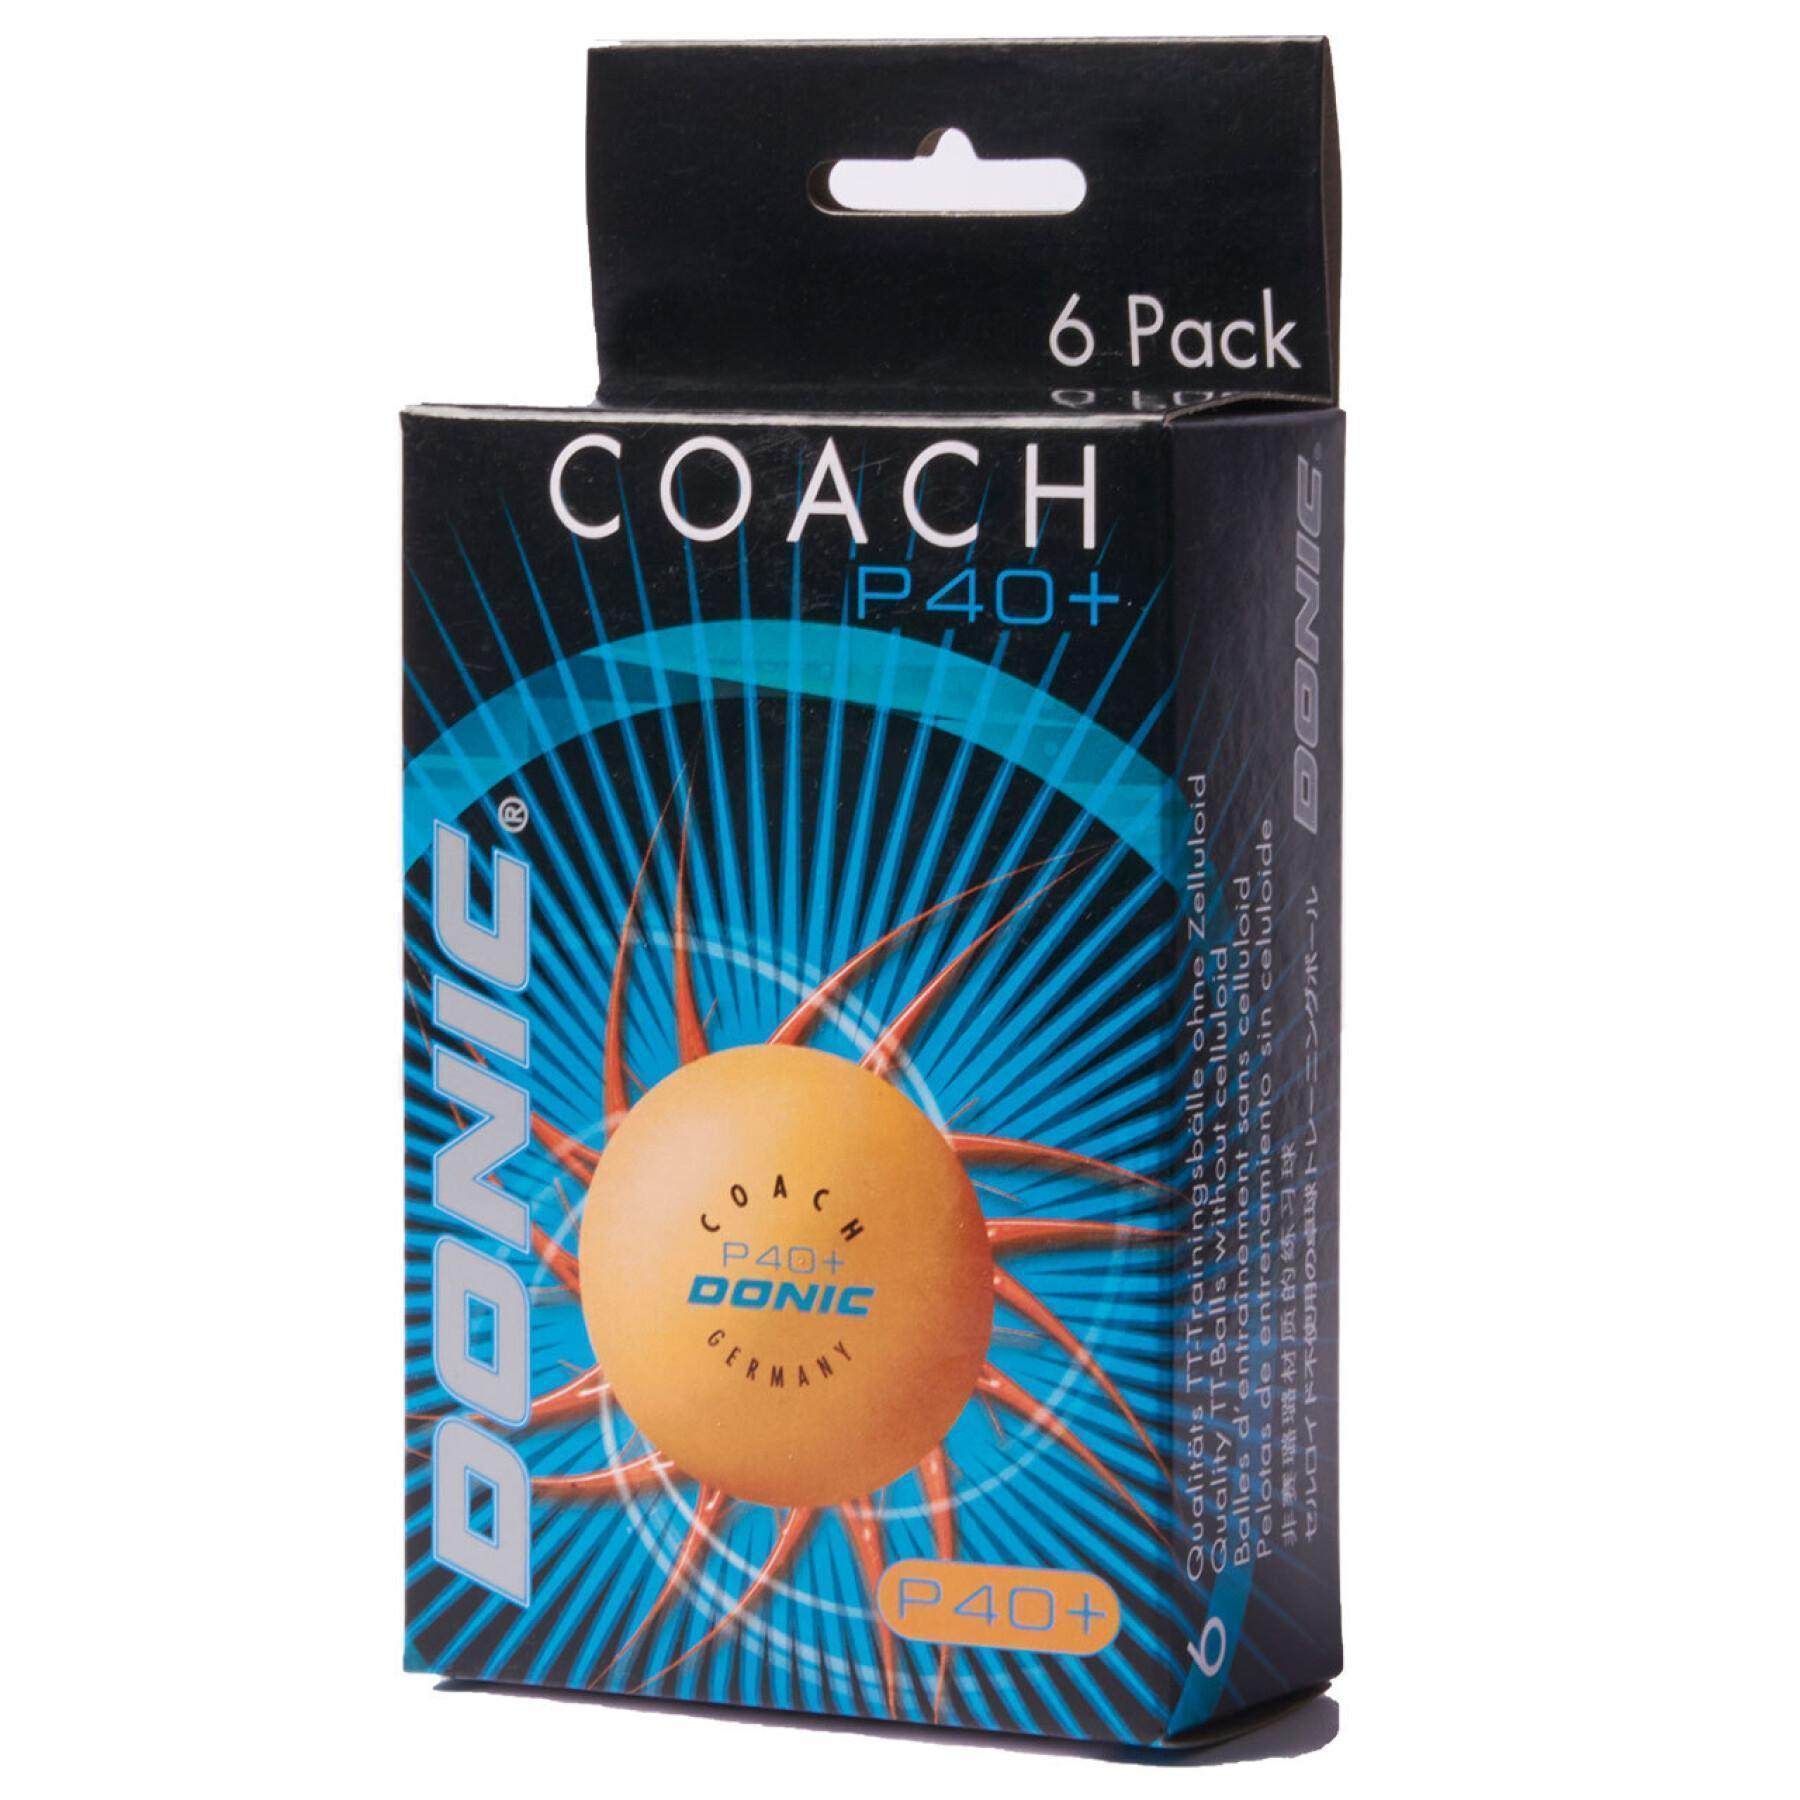 Pack of 6 table tennis balls Donic Coach P40+** (40 mm)